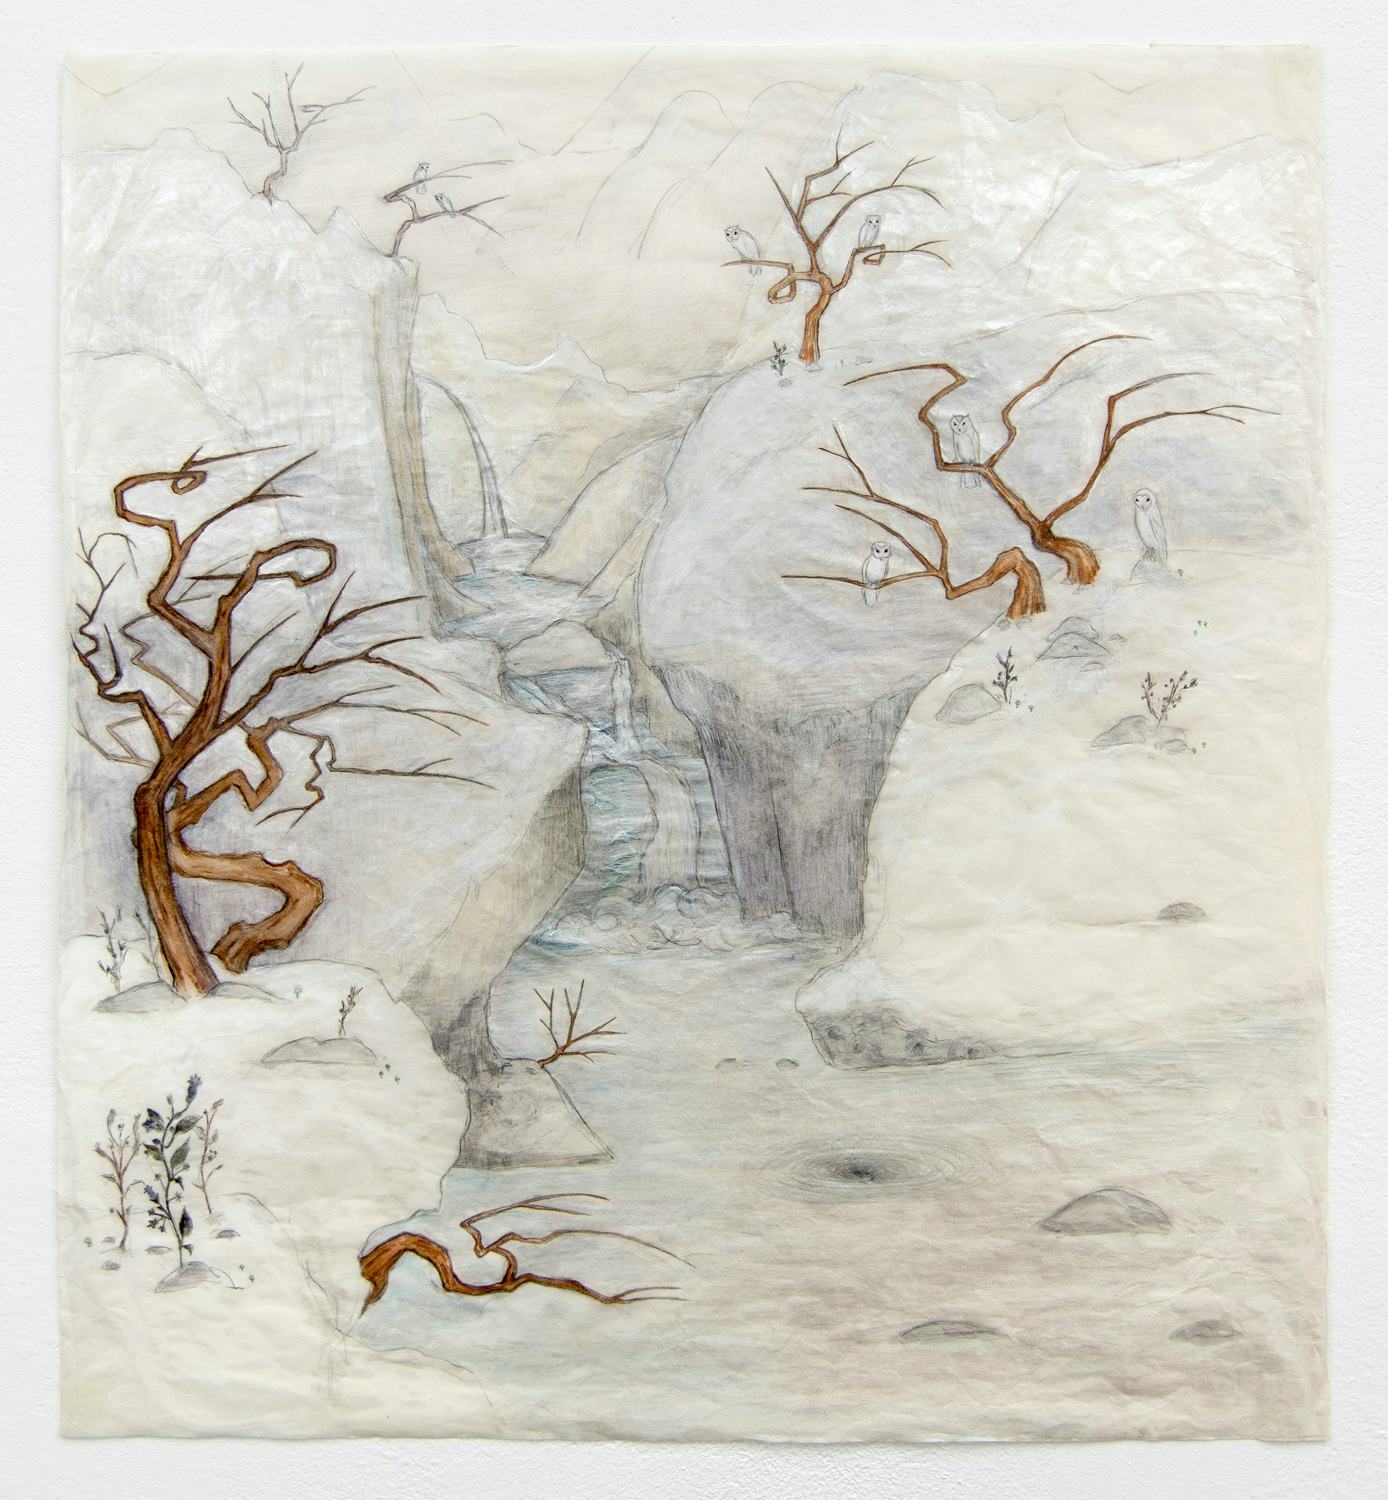 Bad Place (2005)

Pencil and ink on mulberry paper.

30h x 27w inches